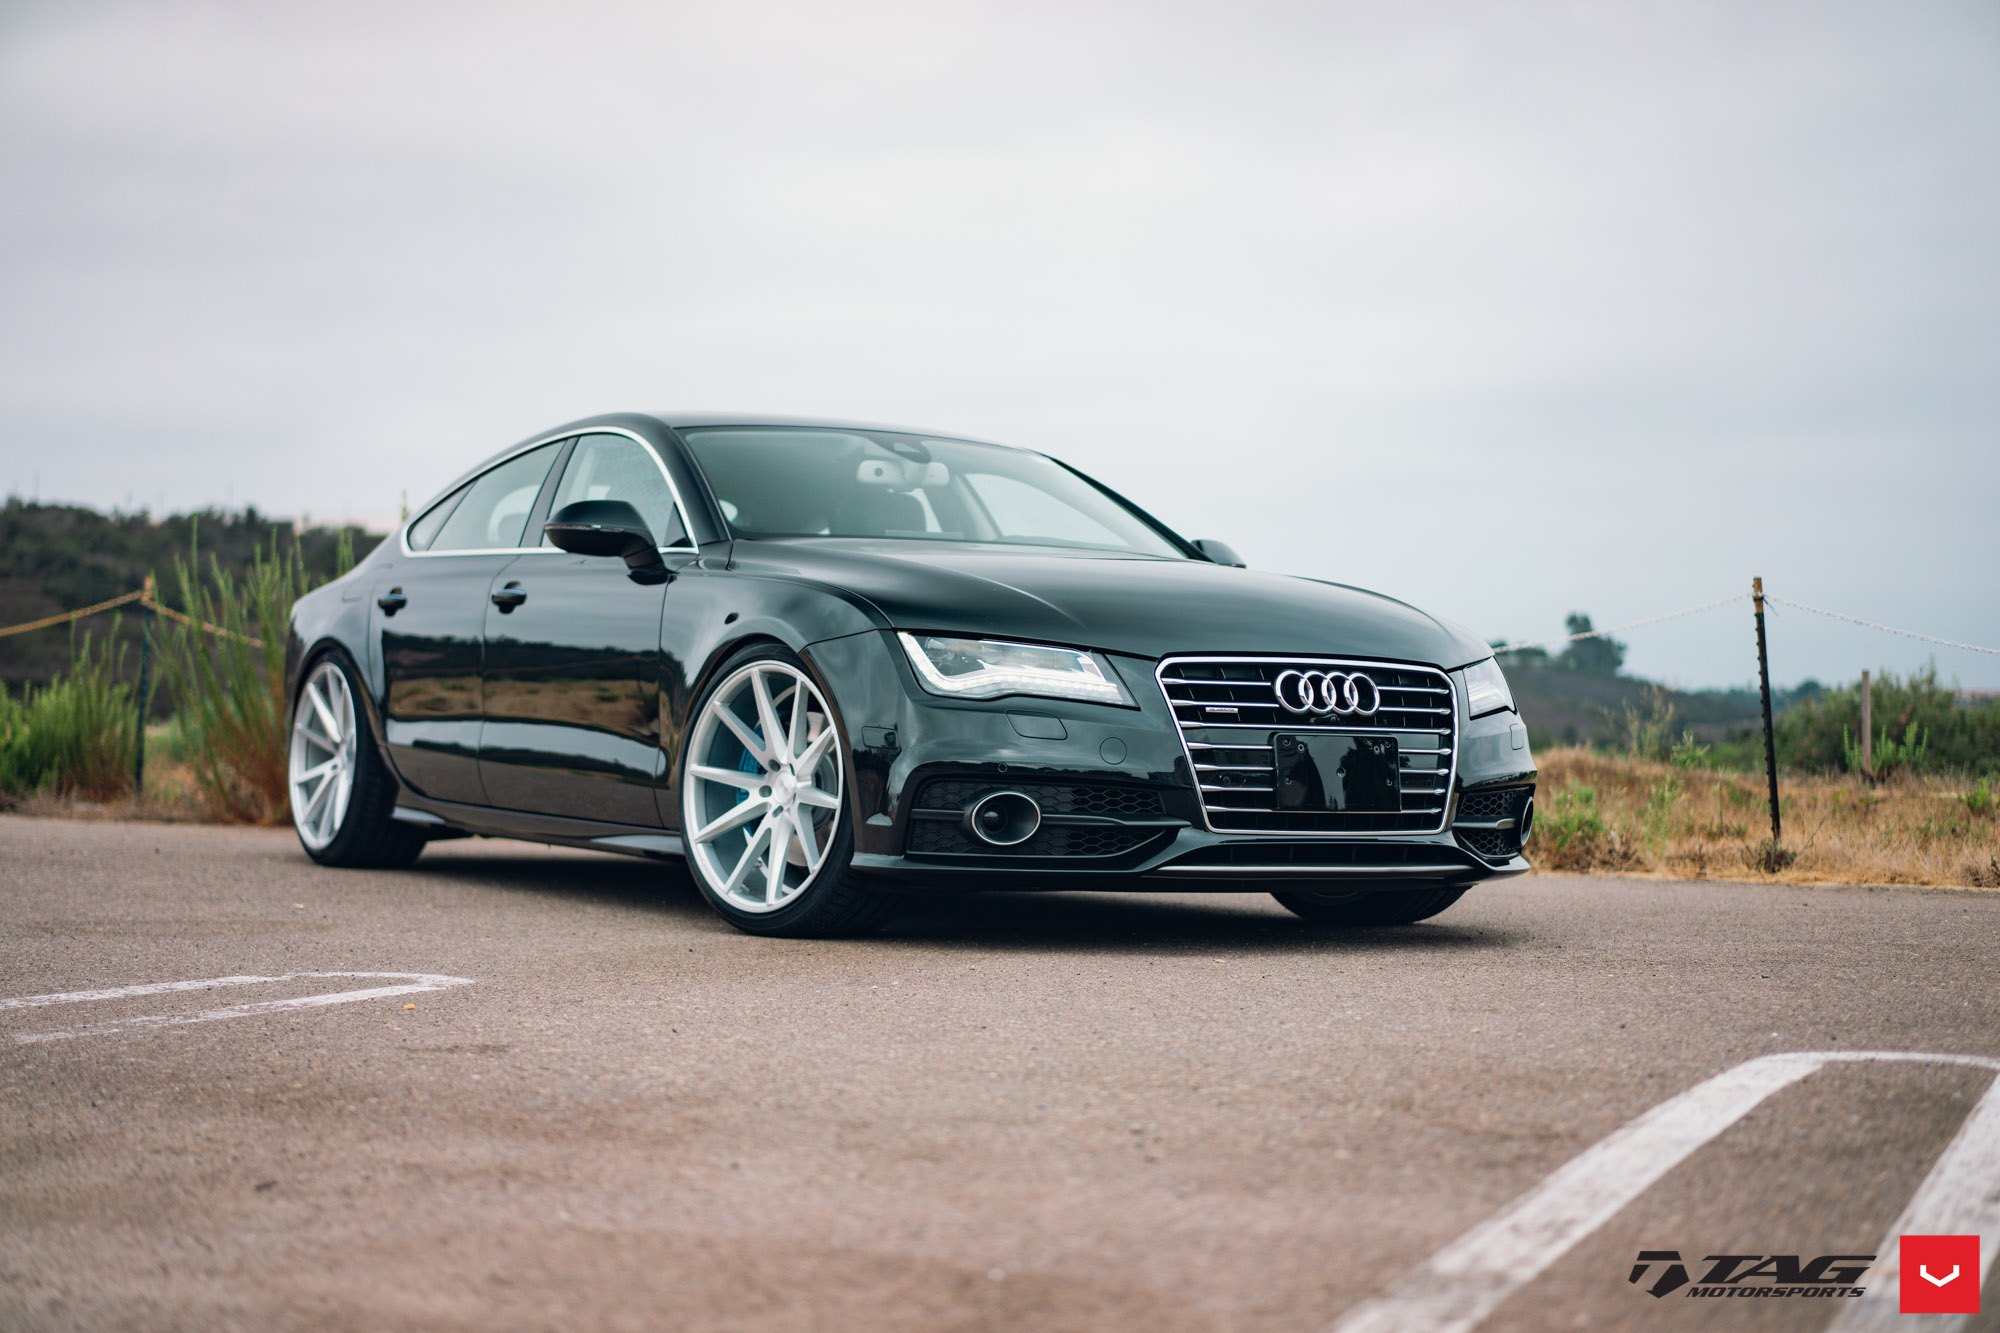 Black Audi A7 with Aftermarket DRL-Bar Headlights - Photo by Vossen